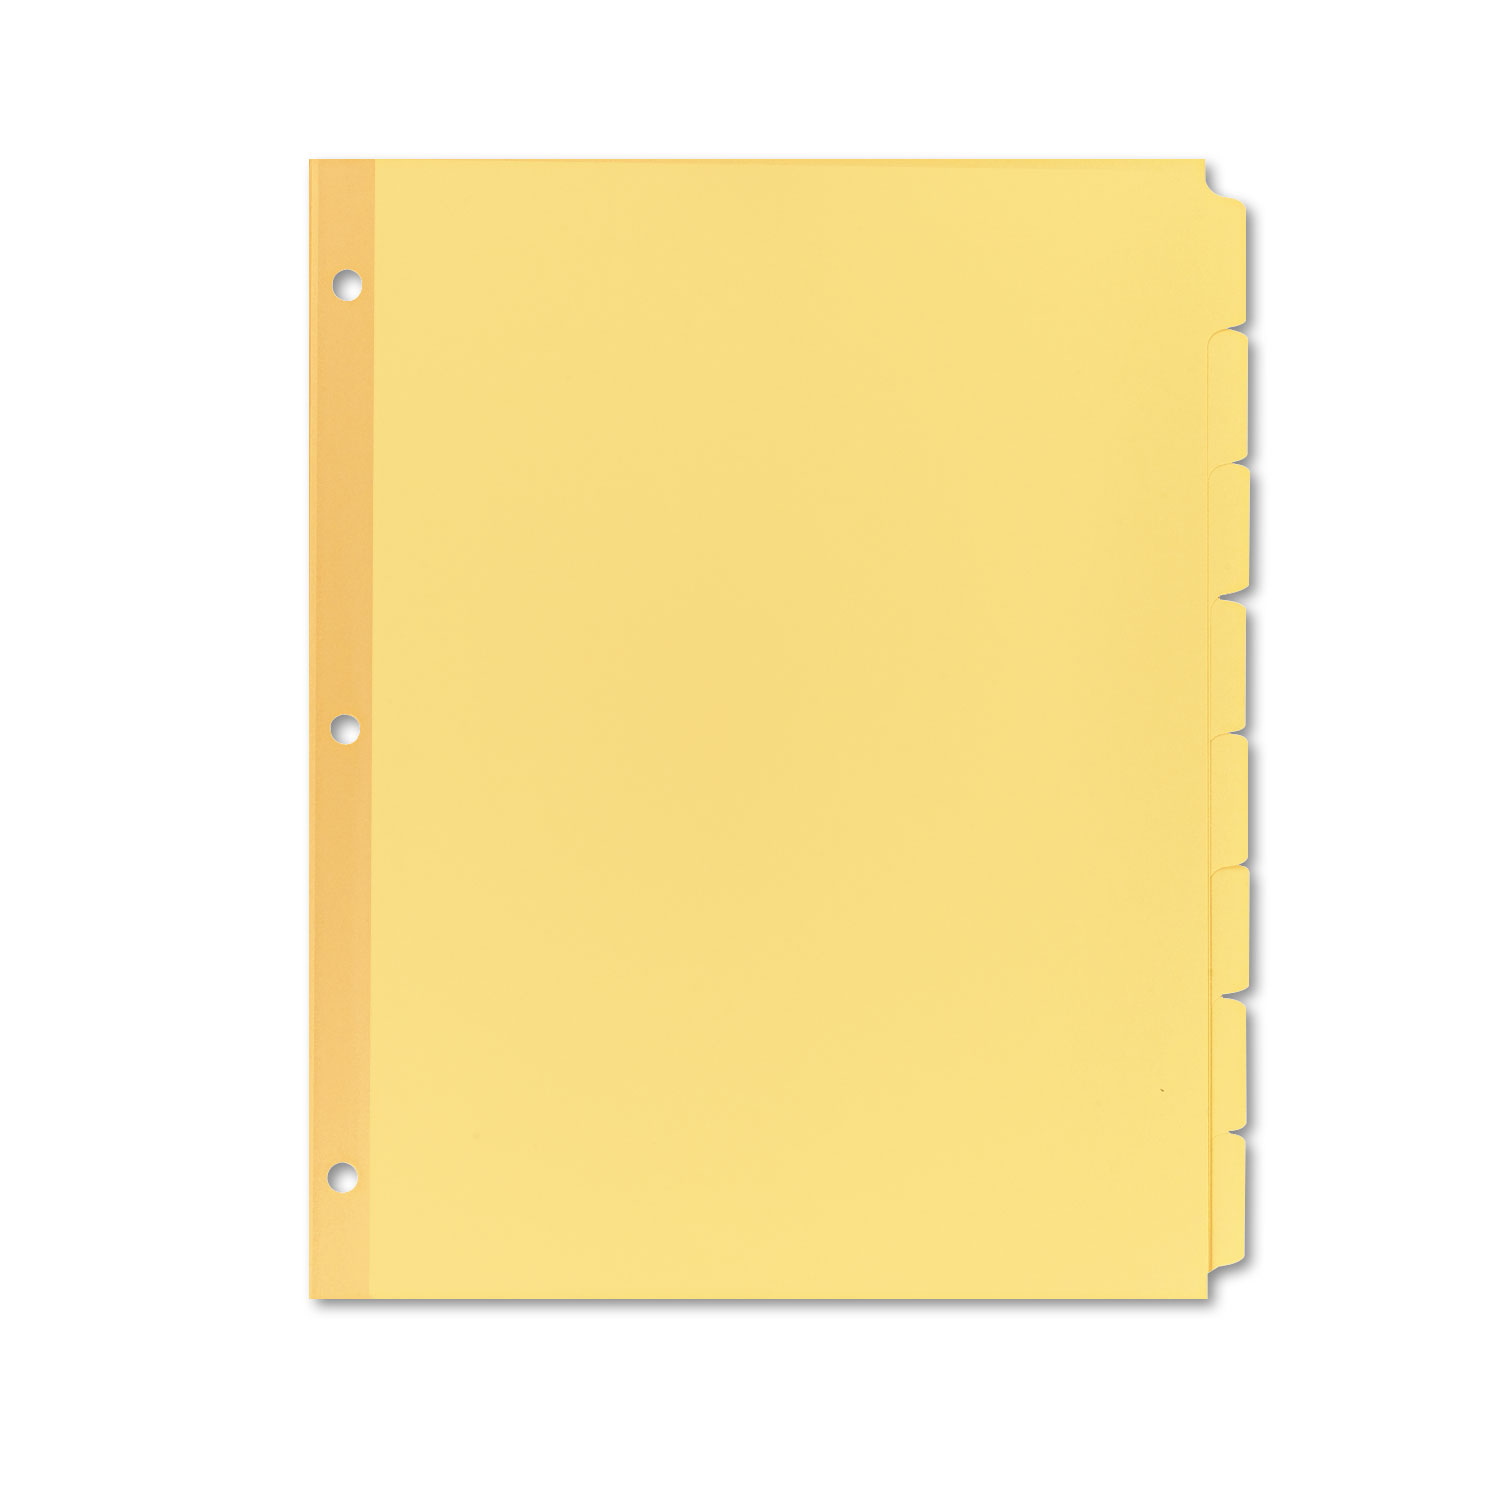  Avery 11505 Write & Erase Plain-Tab Paper Dividers, 8-Tab, Letter, Buff, 24 Sets (AVE11505) 